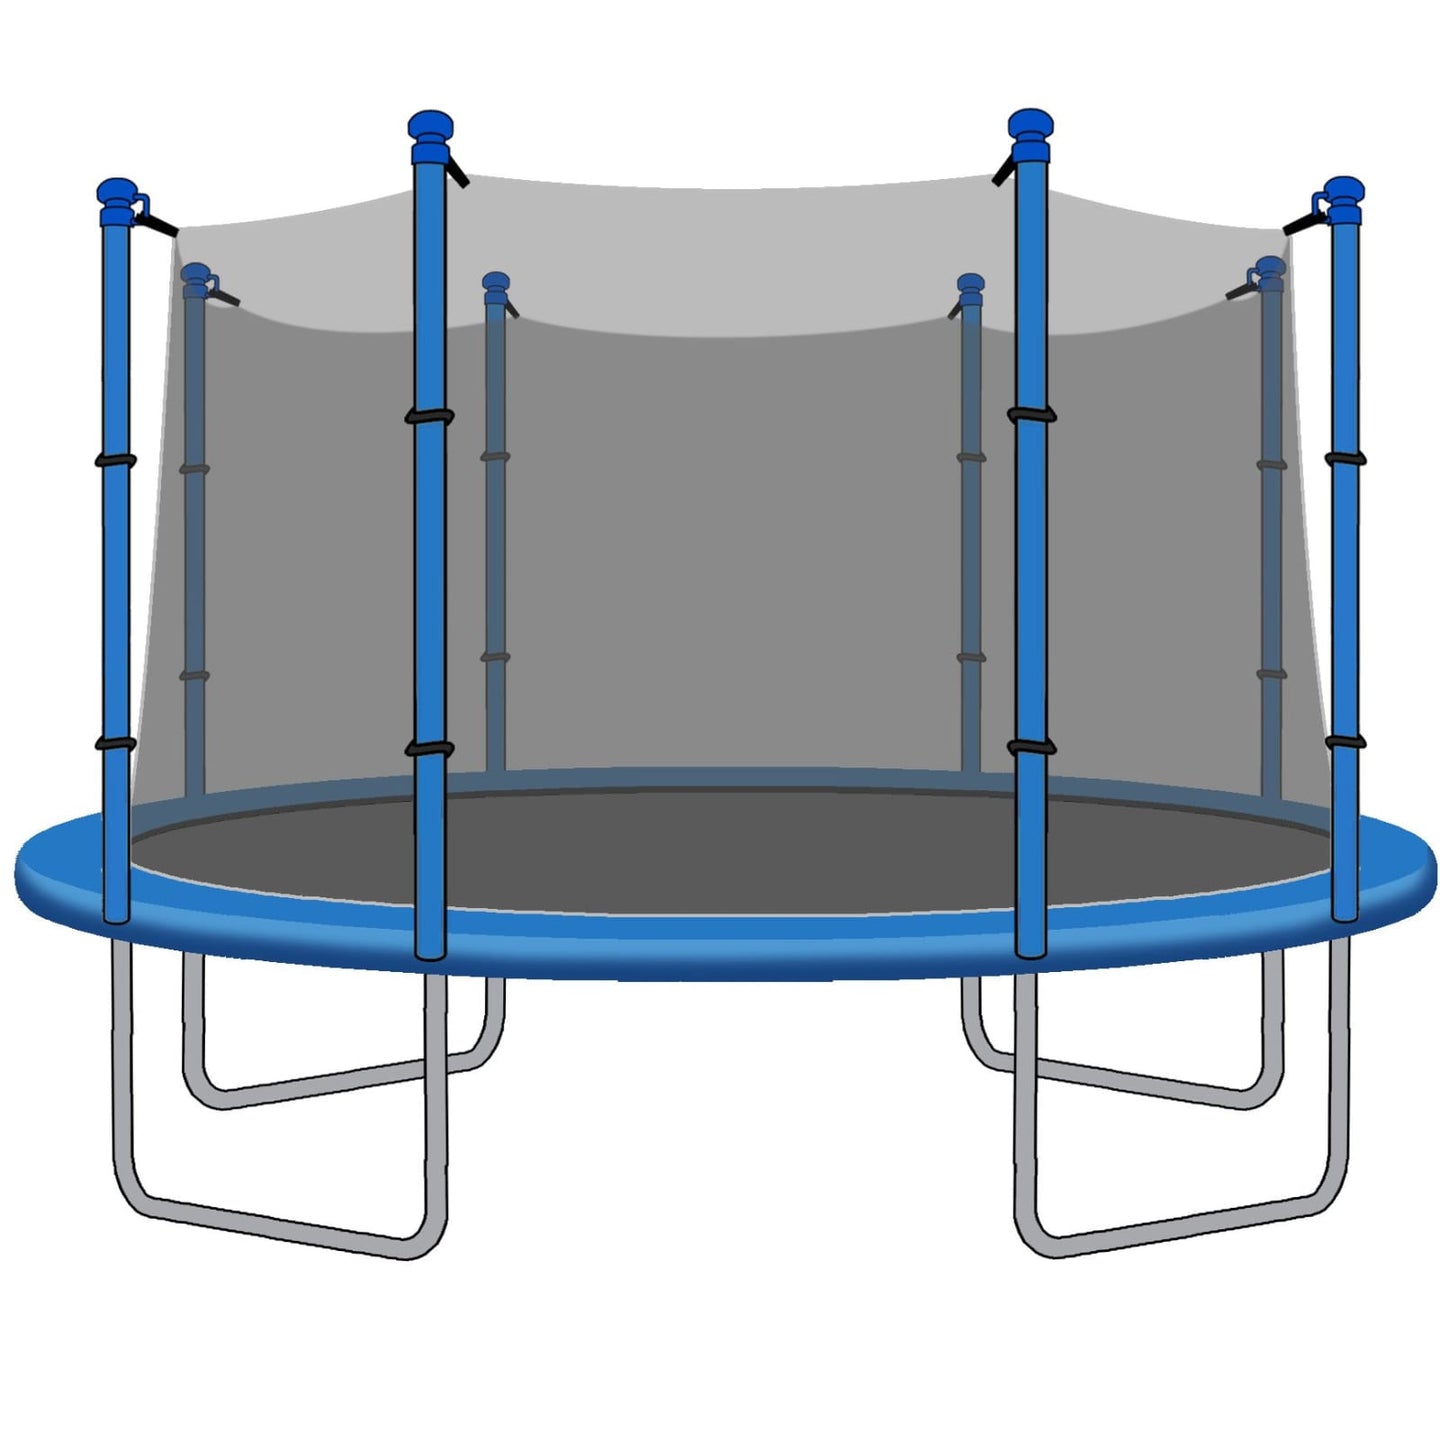 SkyBound 12 Foot Trampoline Net - Fits 12 Foot Frames with 8 Straight Enclosure Poles or 4 Arches - Trampoline Replacements